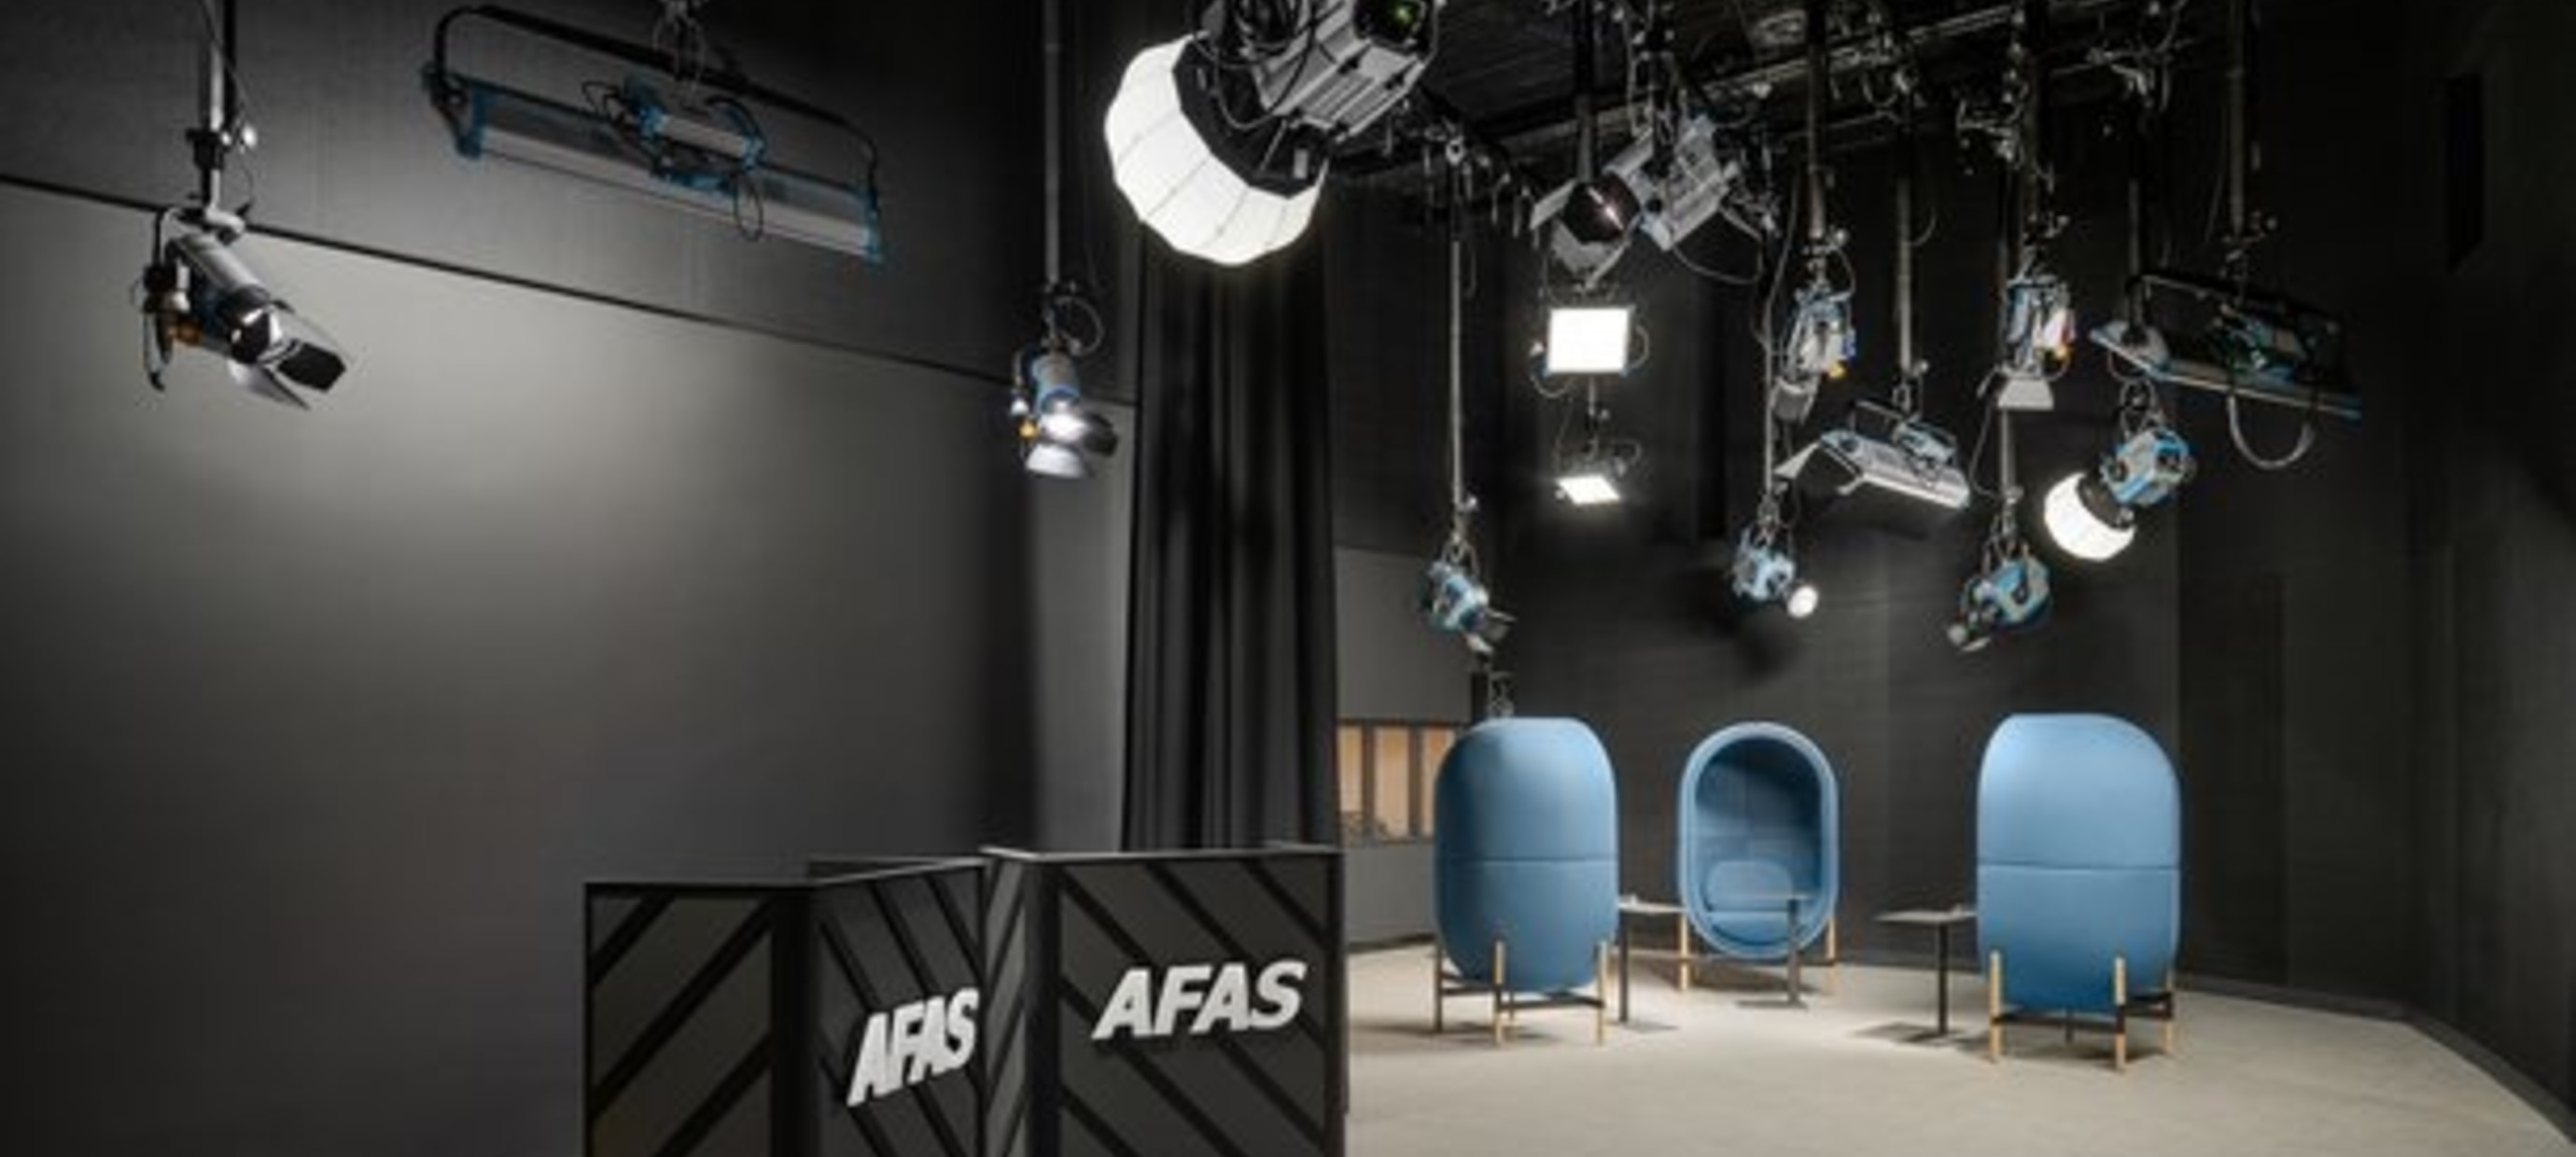 AFAS Experience center